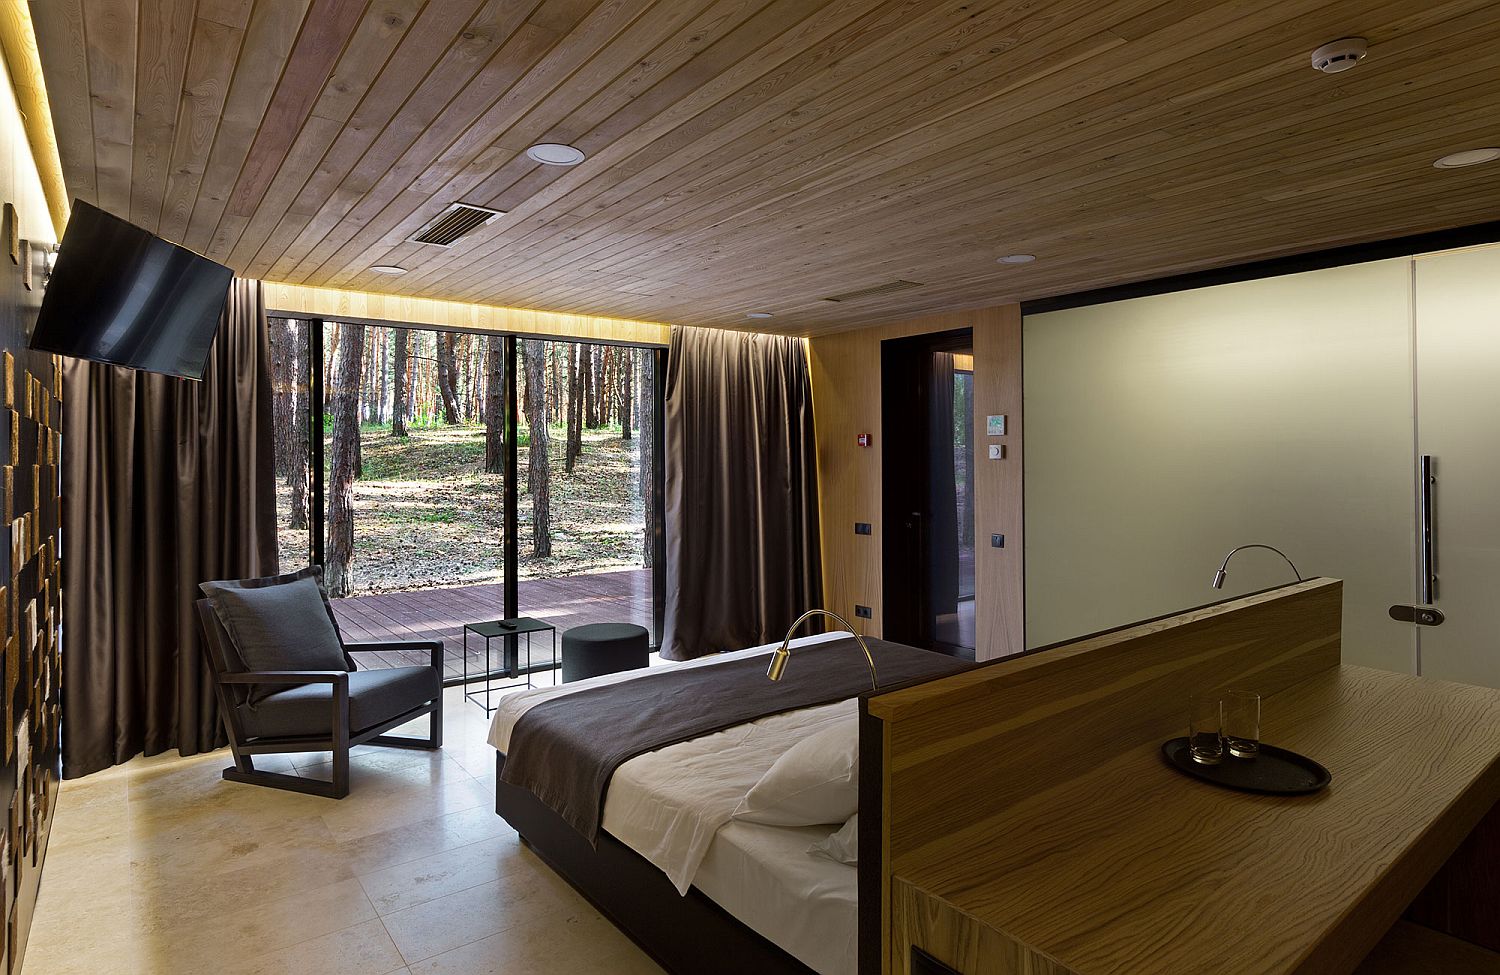 View-of-the-pine-forest-outside-from-the-bedroom-of-the-Guest-House